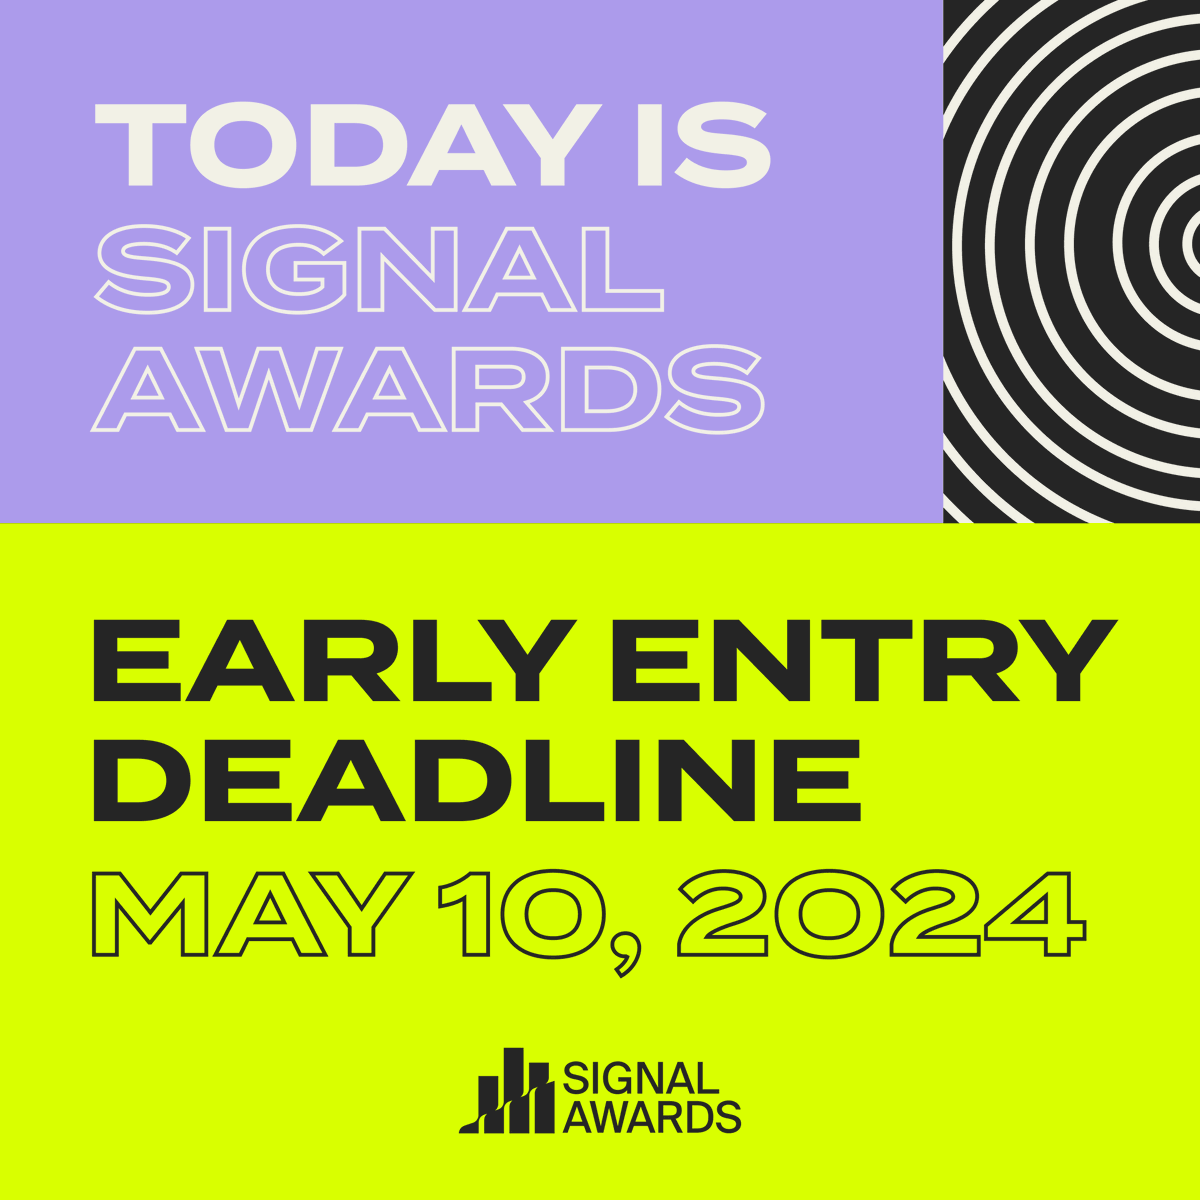 Today is the day! Early Entry Deadline for the Signal Awards is TONIGHT at 11:59 PM PST. 🏆 Enter your podcasts at to be considered among the best shows being created today by clicking here: ow.ly/eTbJ50RwaJw!